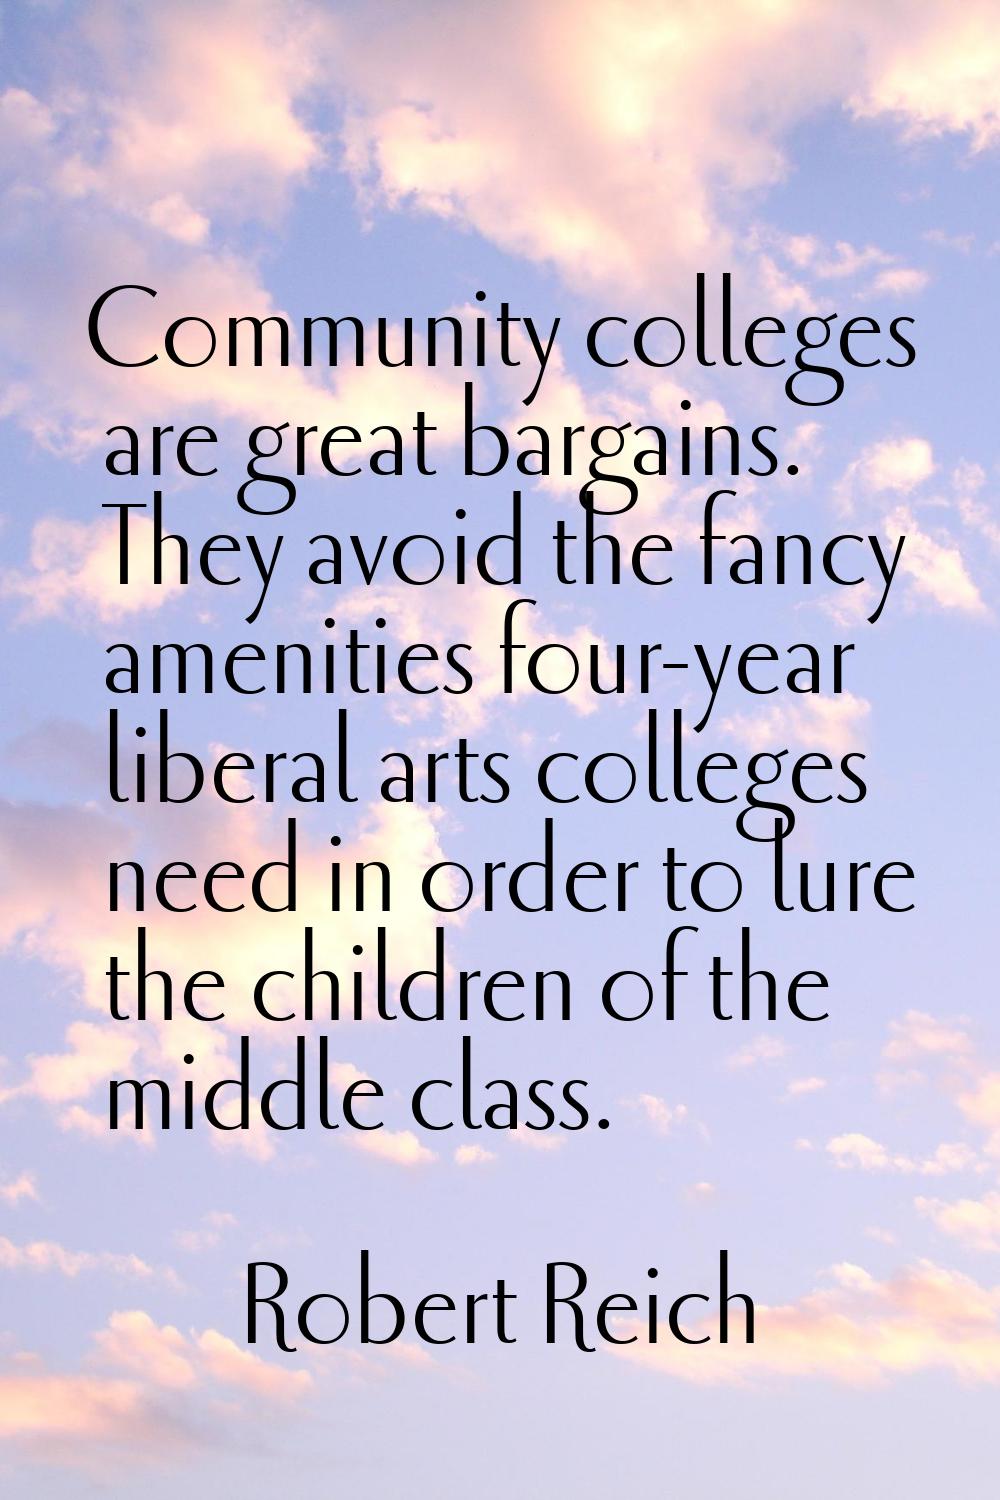 Community colleges are great bargains. They avoid the fancy amenities four-year liberal arts colleg